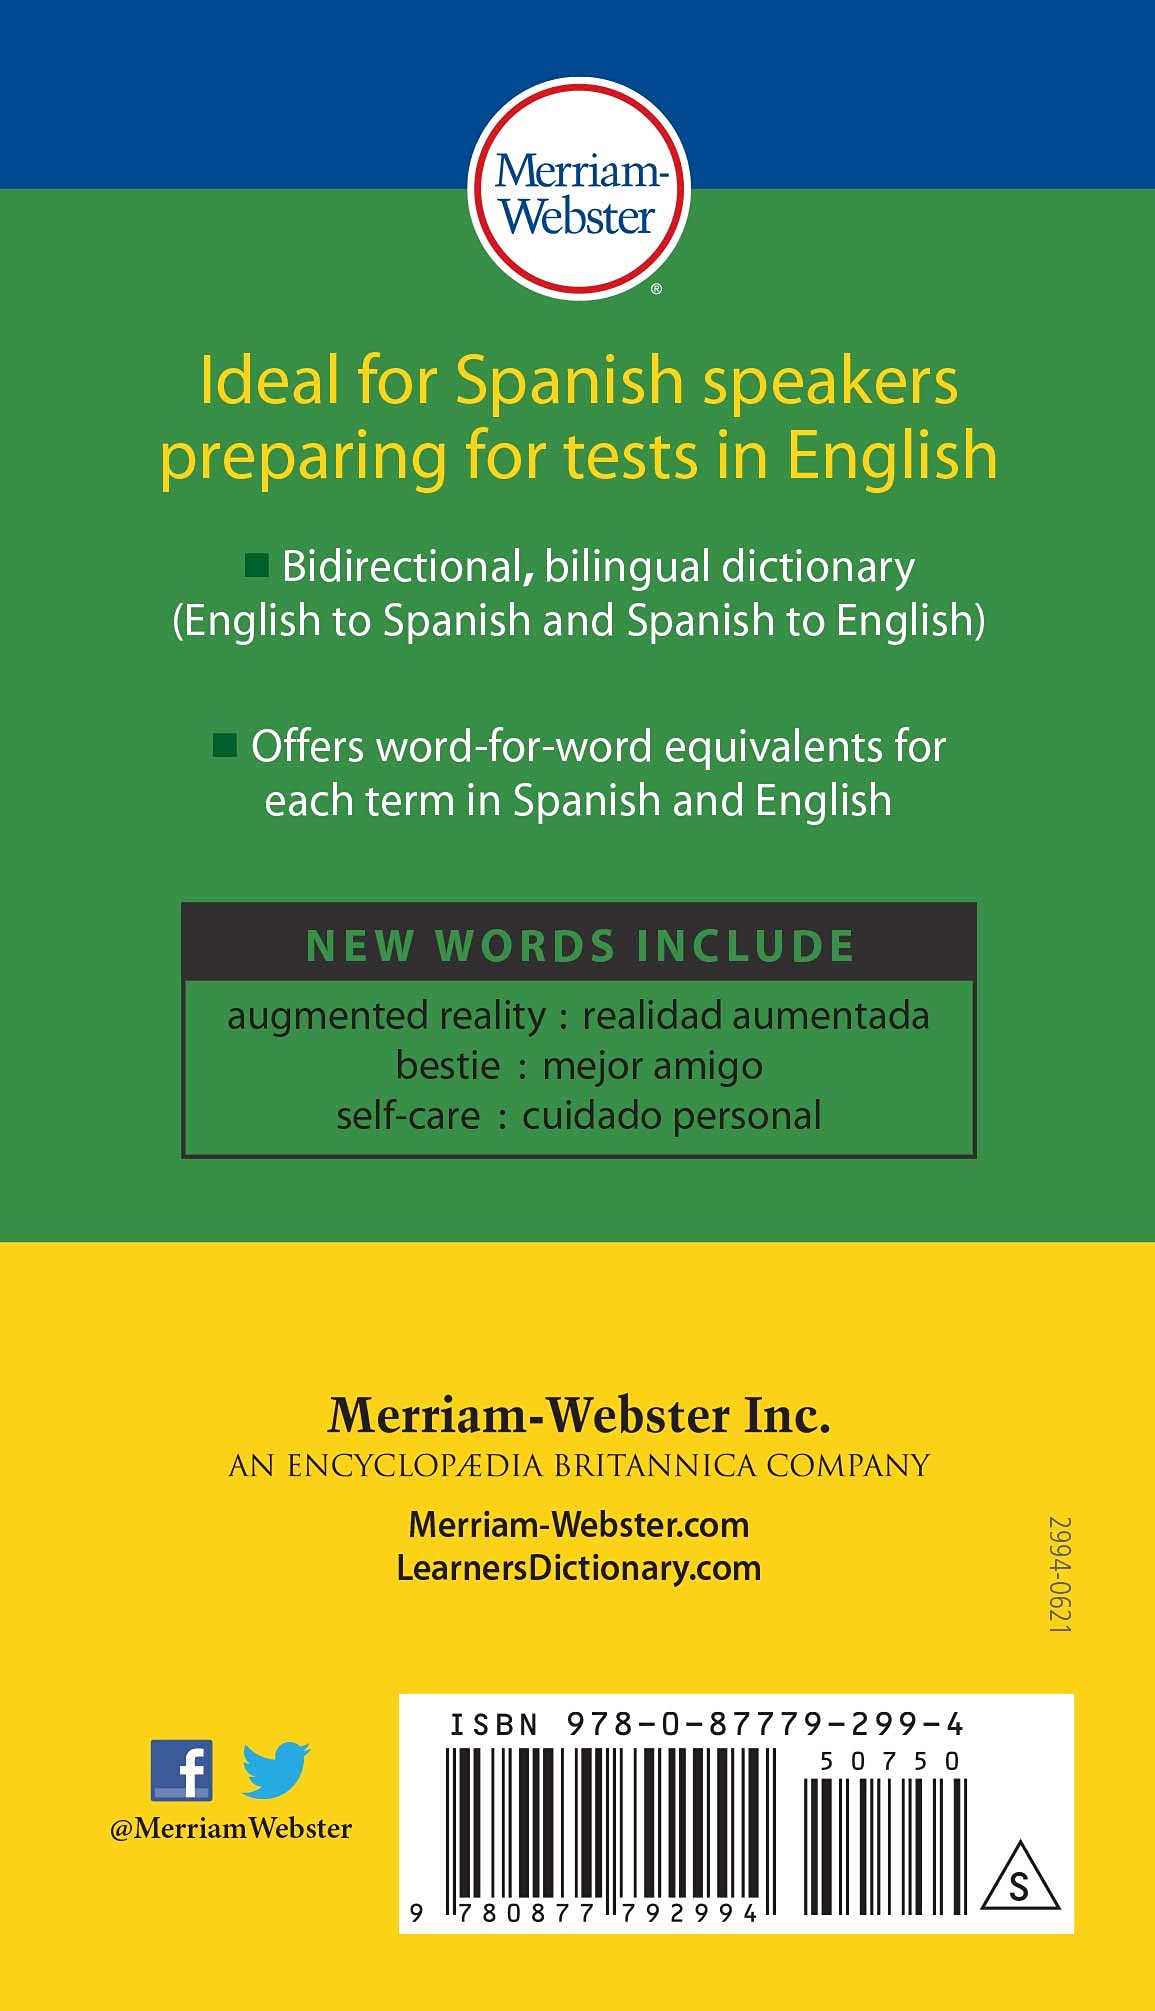 Merriam-Webster's Word-for-Word Spanish-English Dictionary, New Edition, 2021 Copyright, Mass-Market Paperback (Multilingual, English and Spanish Edition)